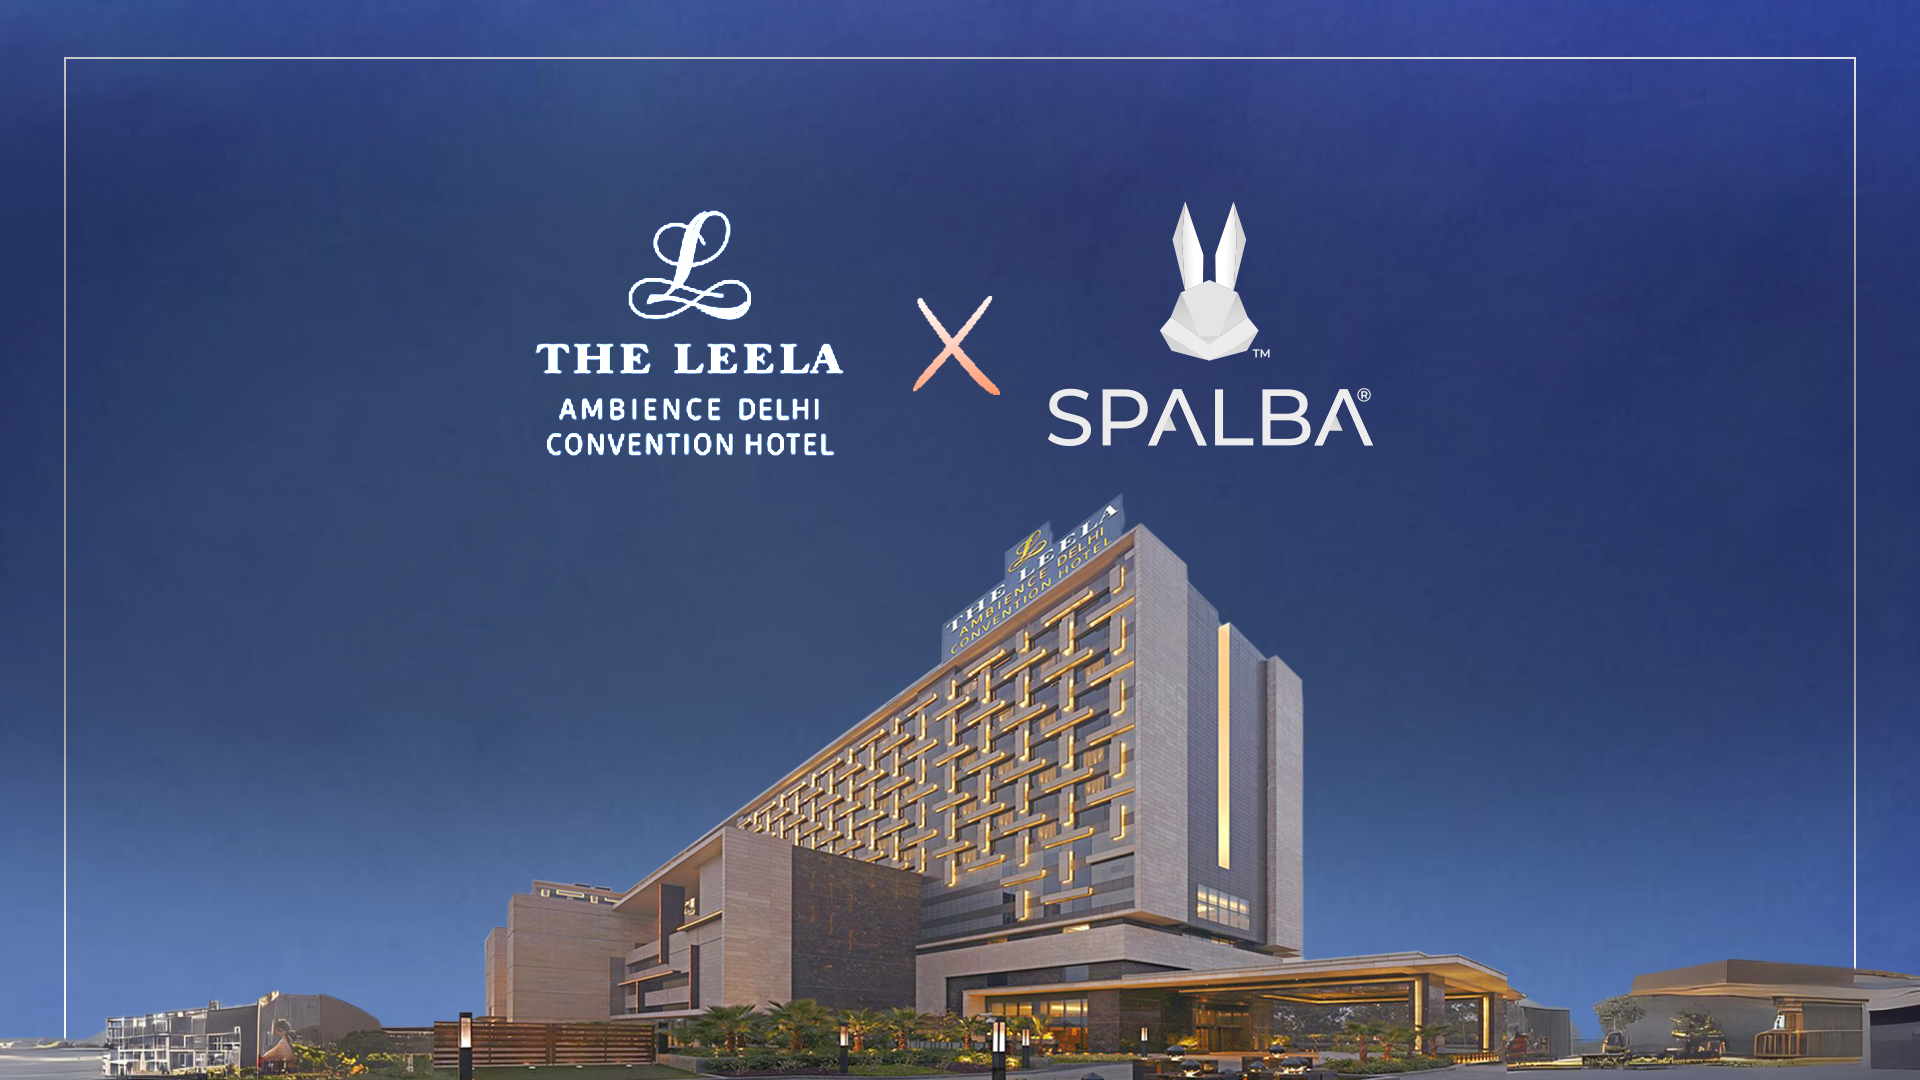 Spalba Onboards Leela Ambience Convention Hotel for Enhanced Event Planning and Venue Presentation